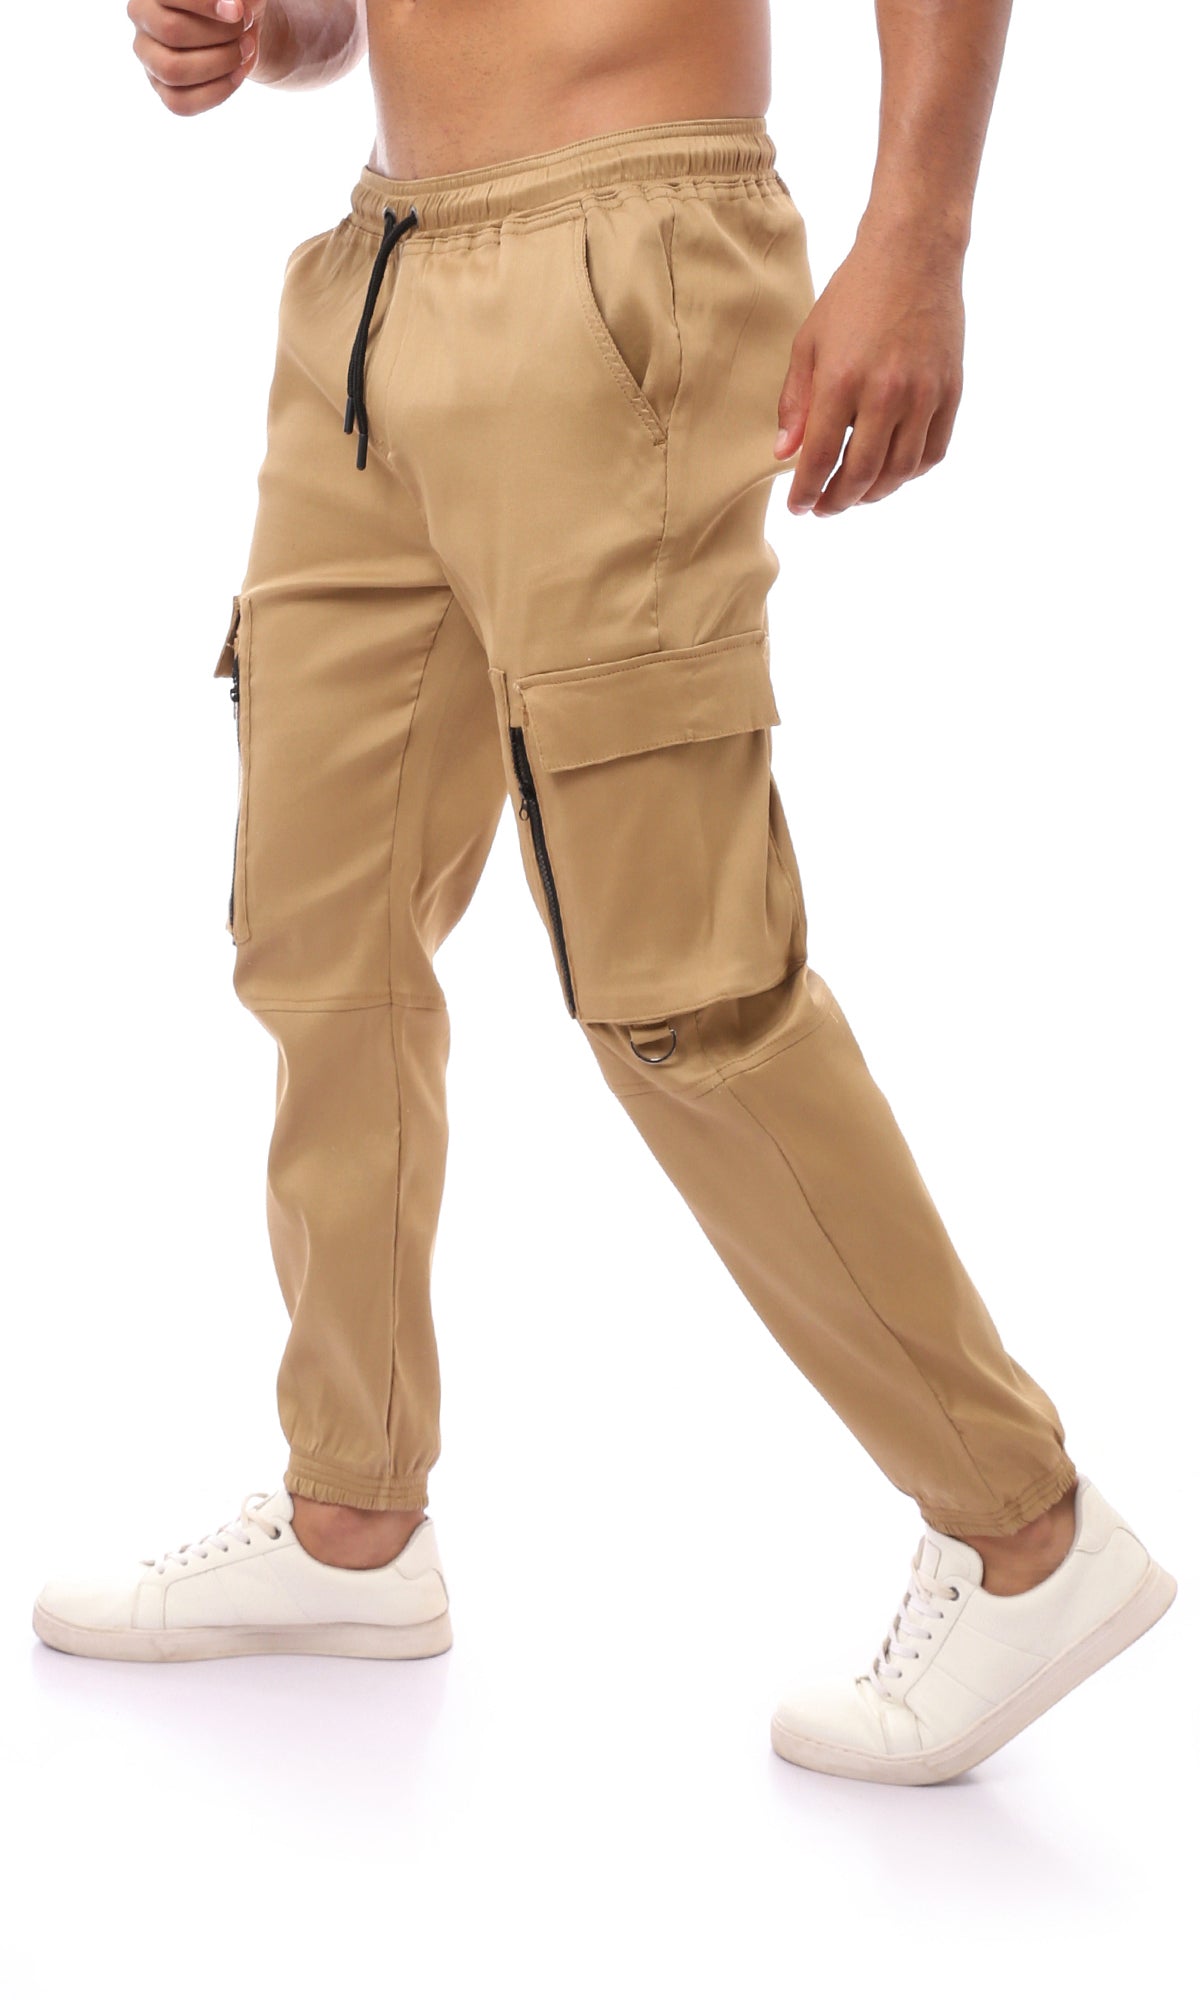 O169753 Beige Slip On Comfy Trousers With Hem